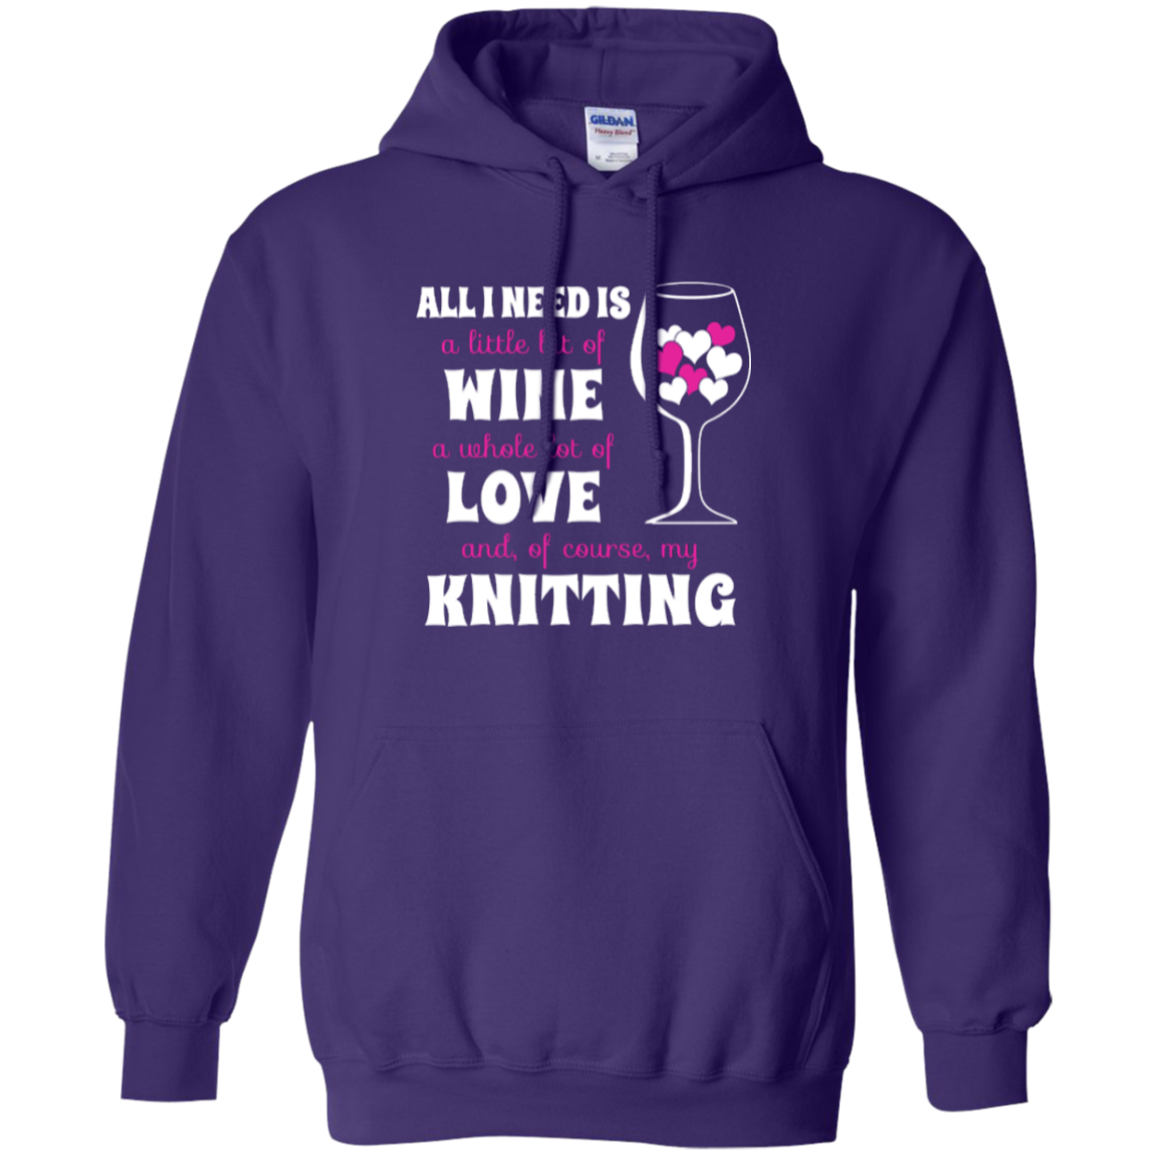 All I Need is Wine-Love-Knitting Pullover Hoodies - Crafter4Life - 8